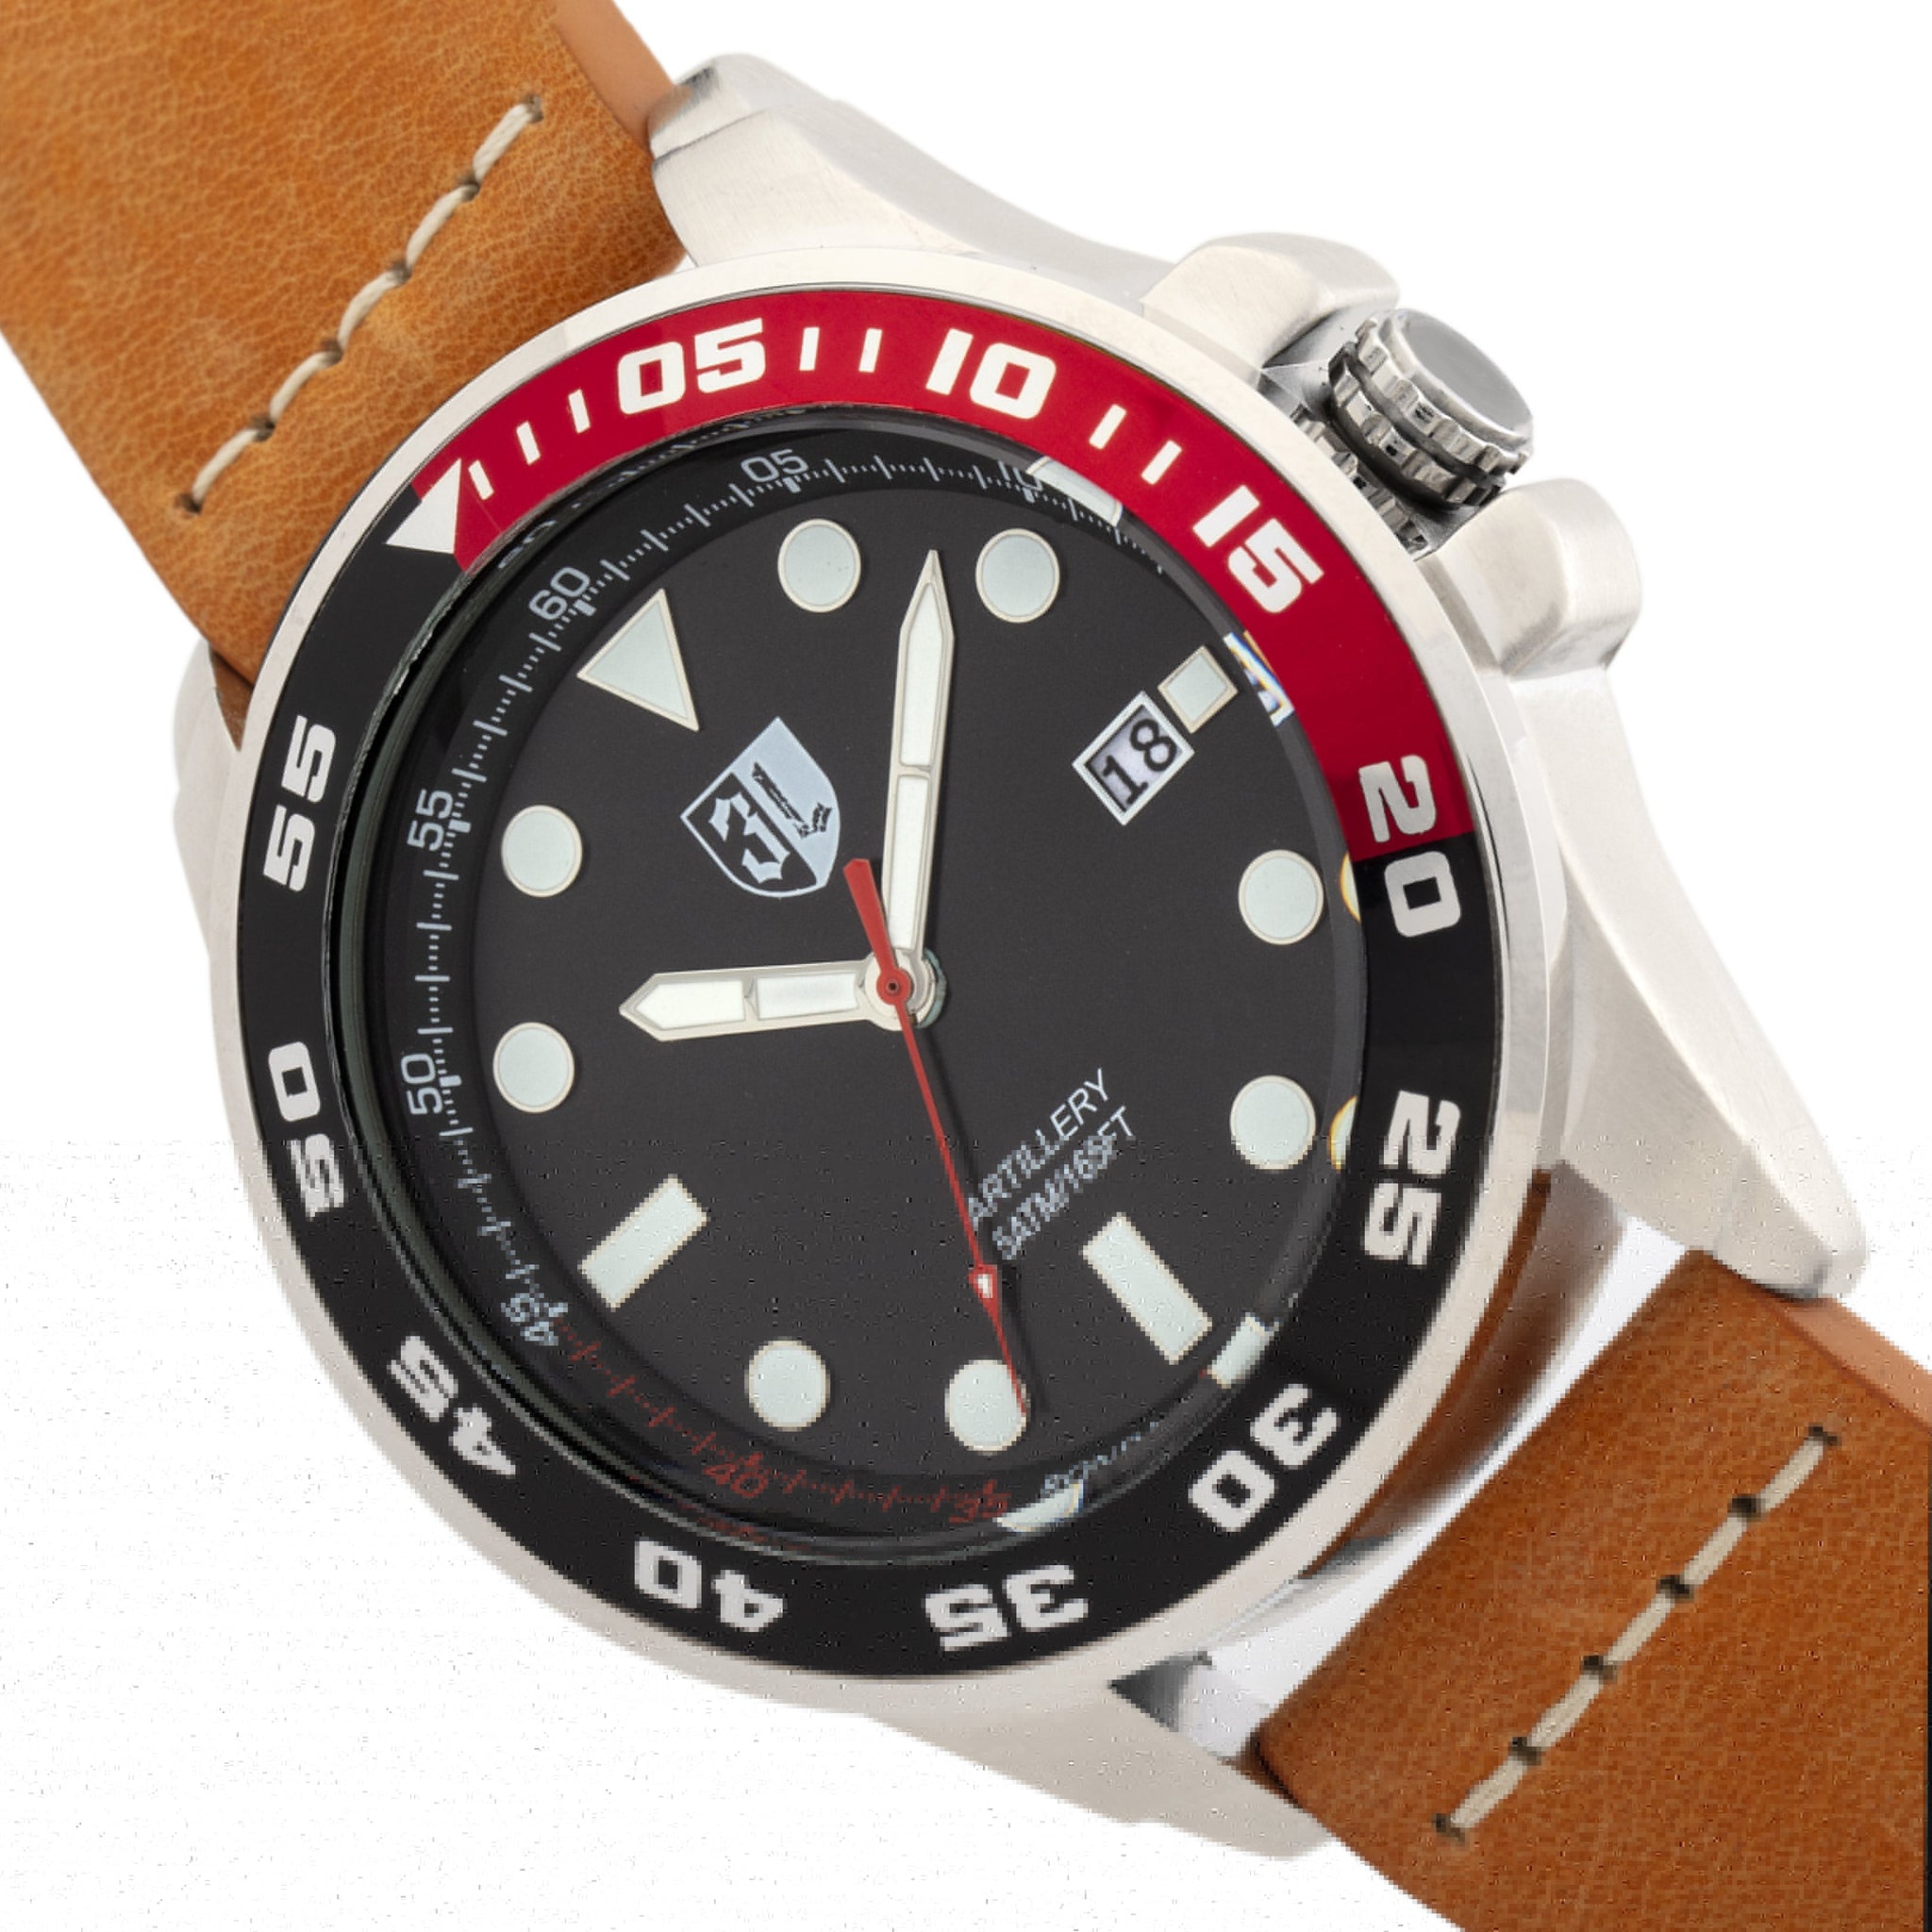 Three Leagues Artillery Leather-Band Watch with Date - Black/Camel - TLW3L102